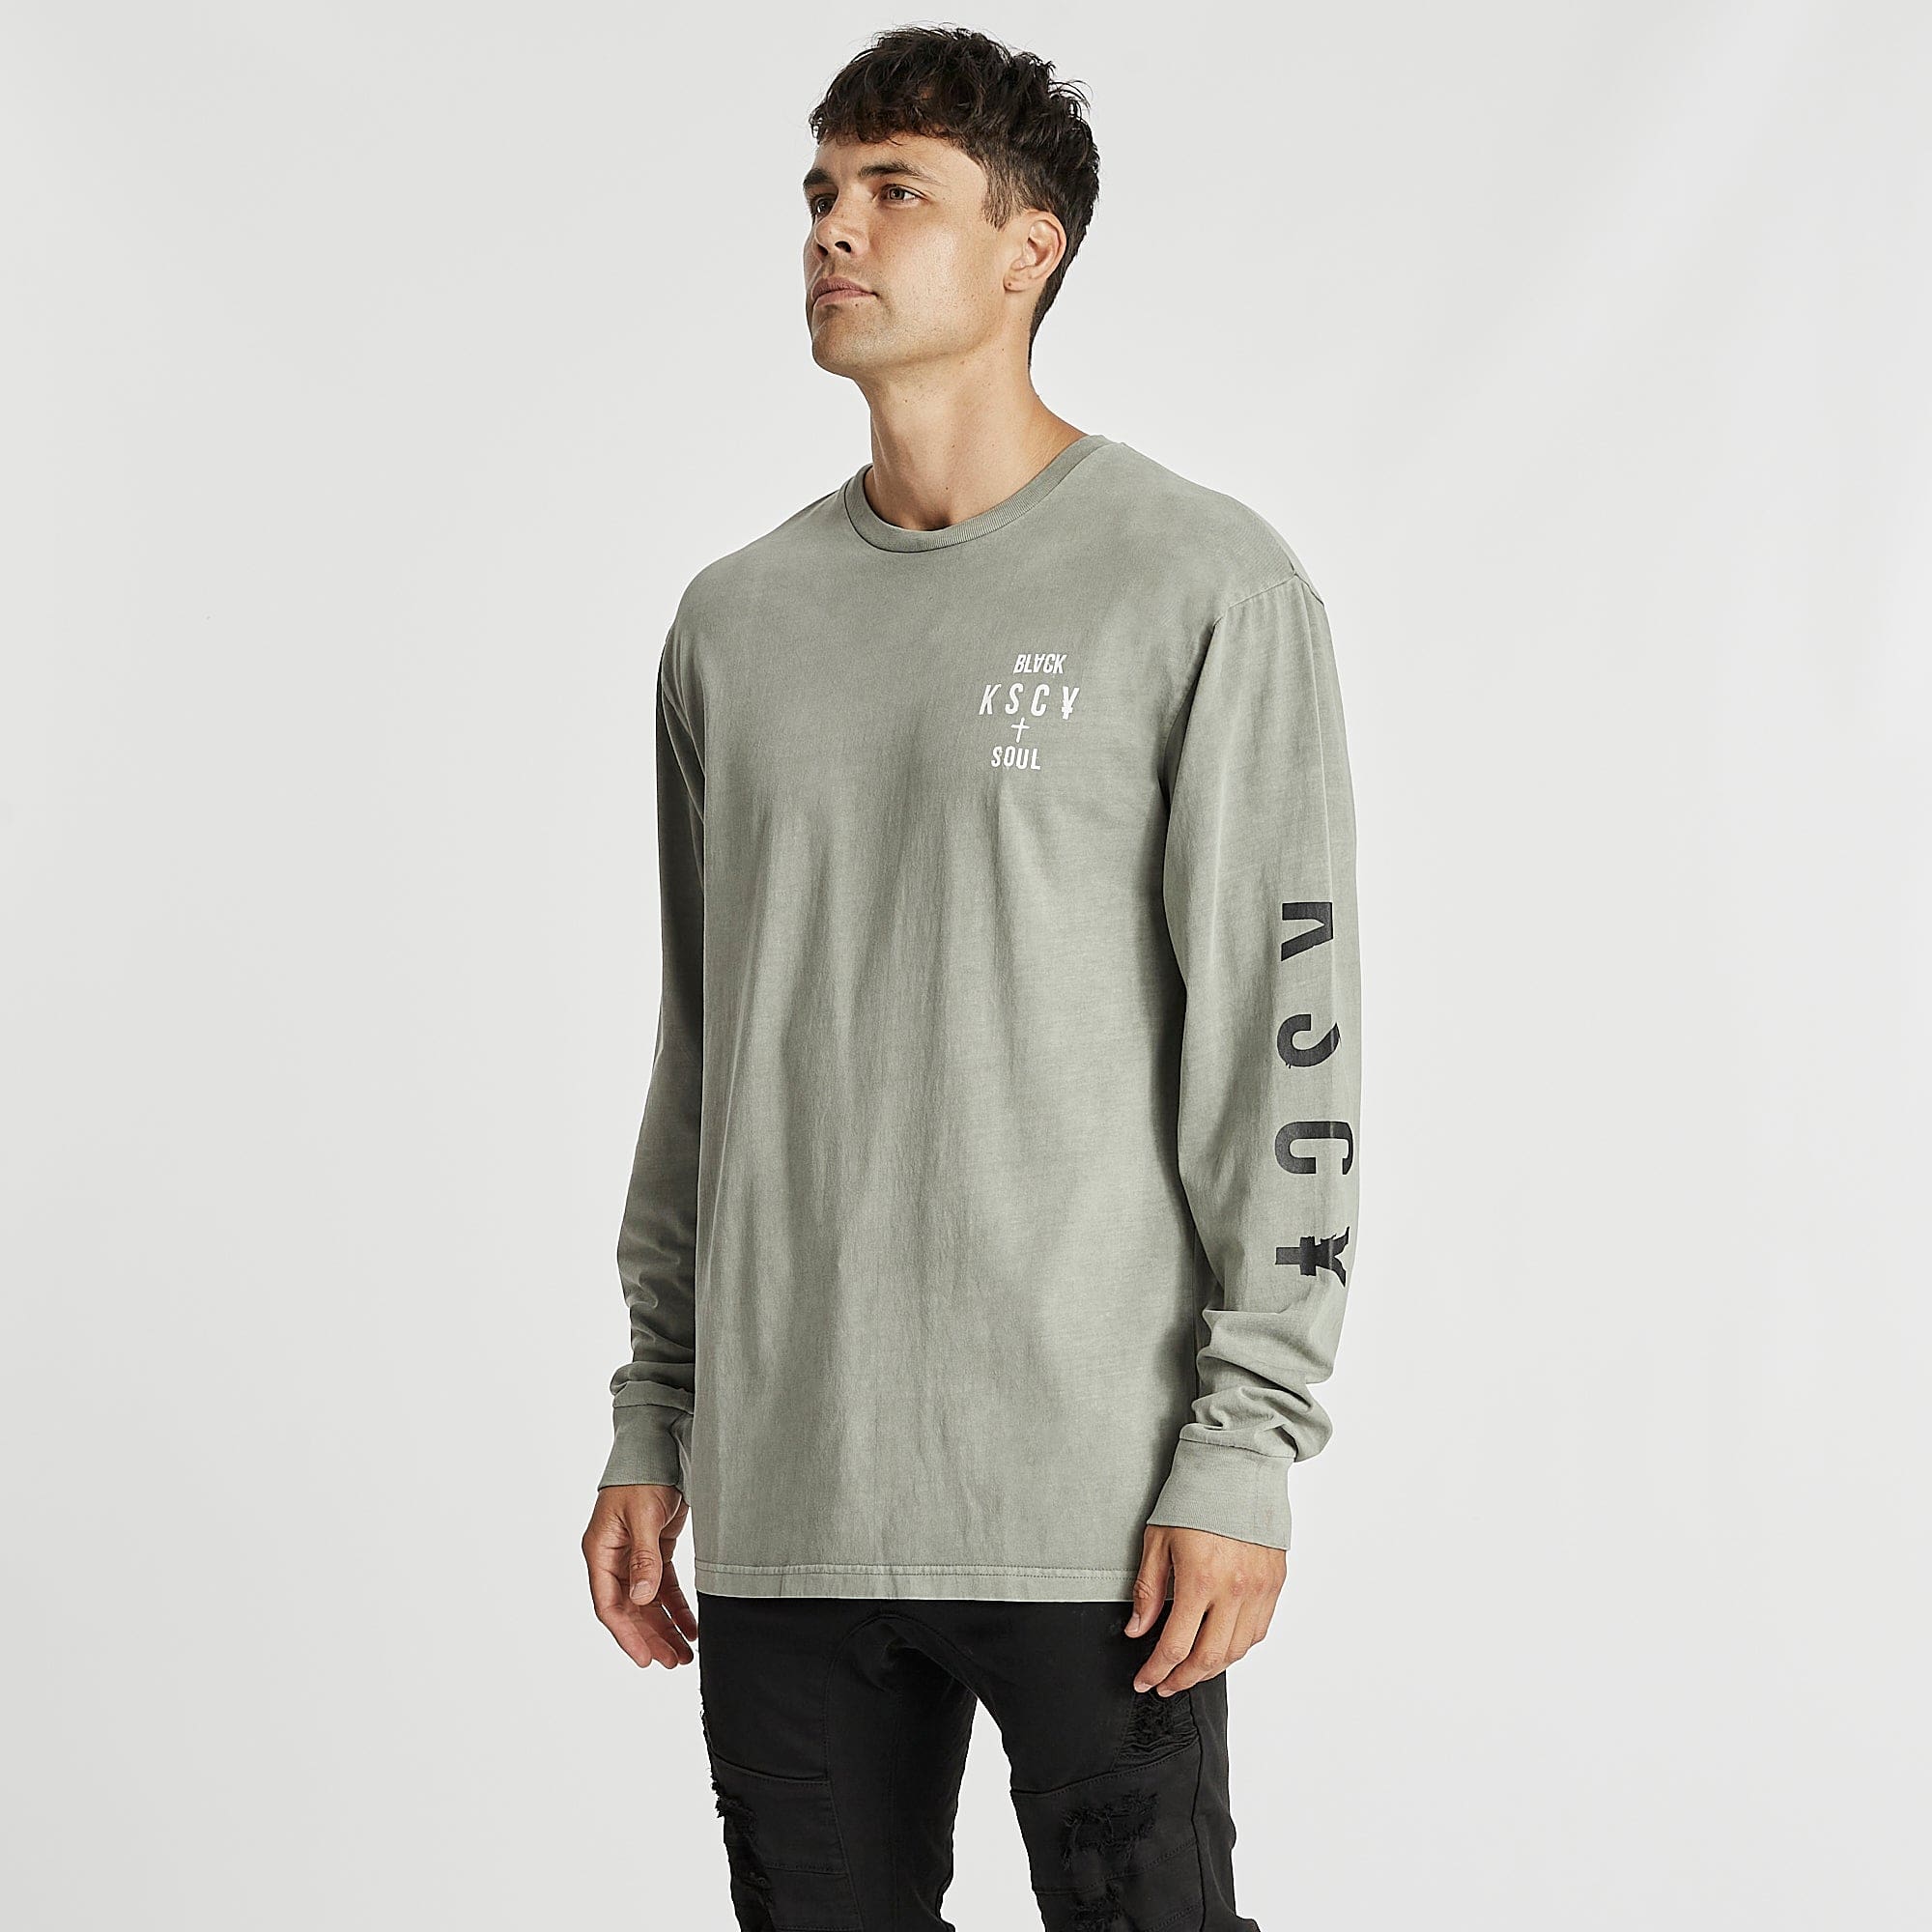 Foolish Relaxed L/S T-Shirt Pigment Shadow